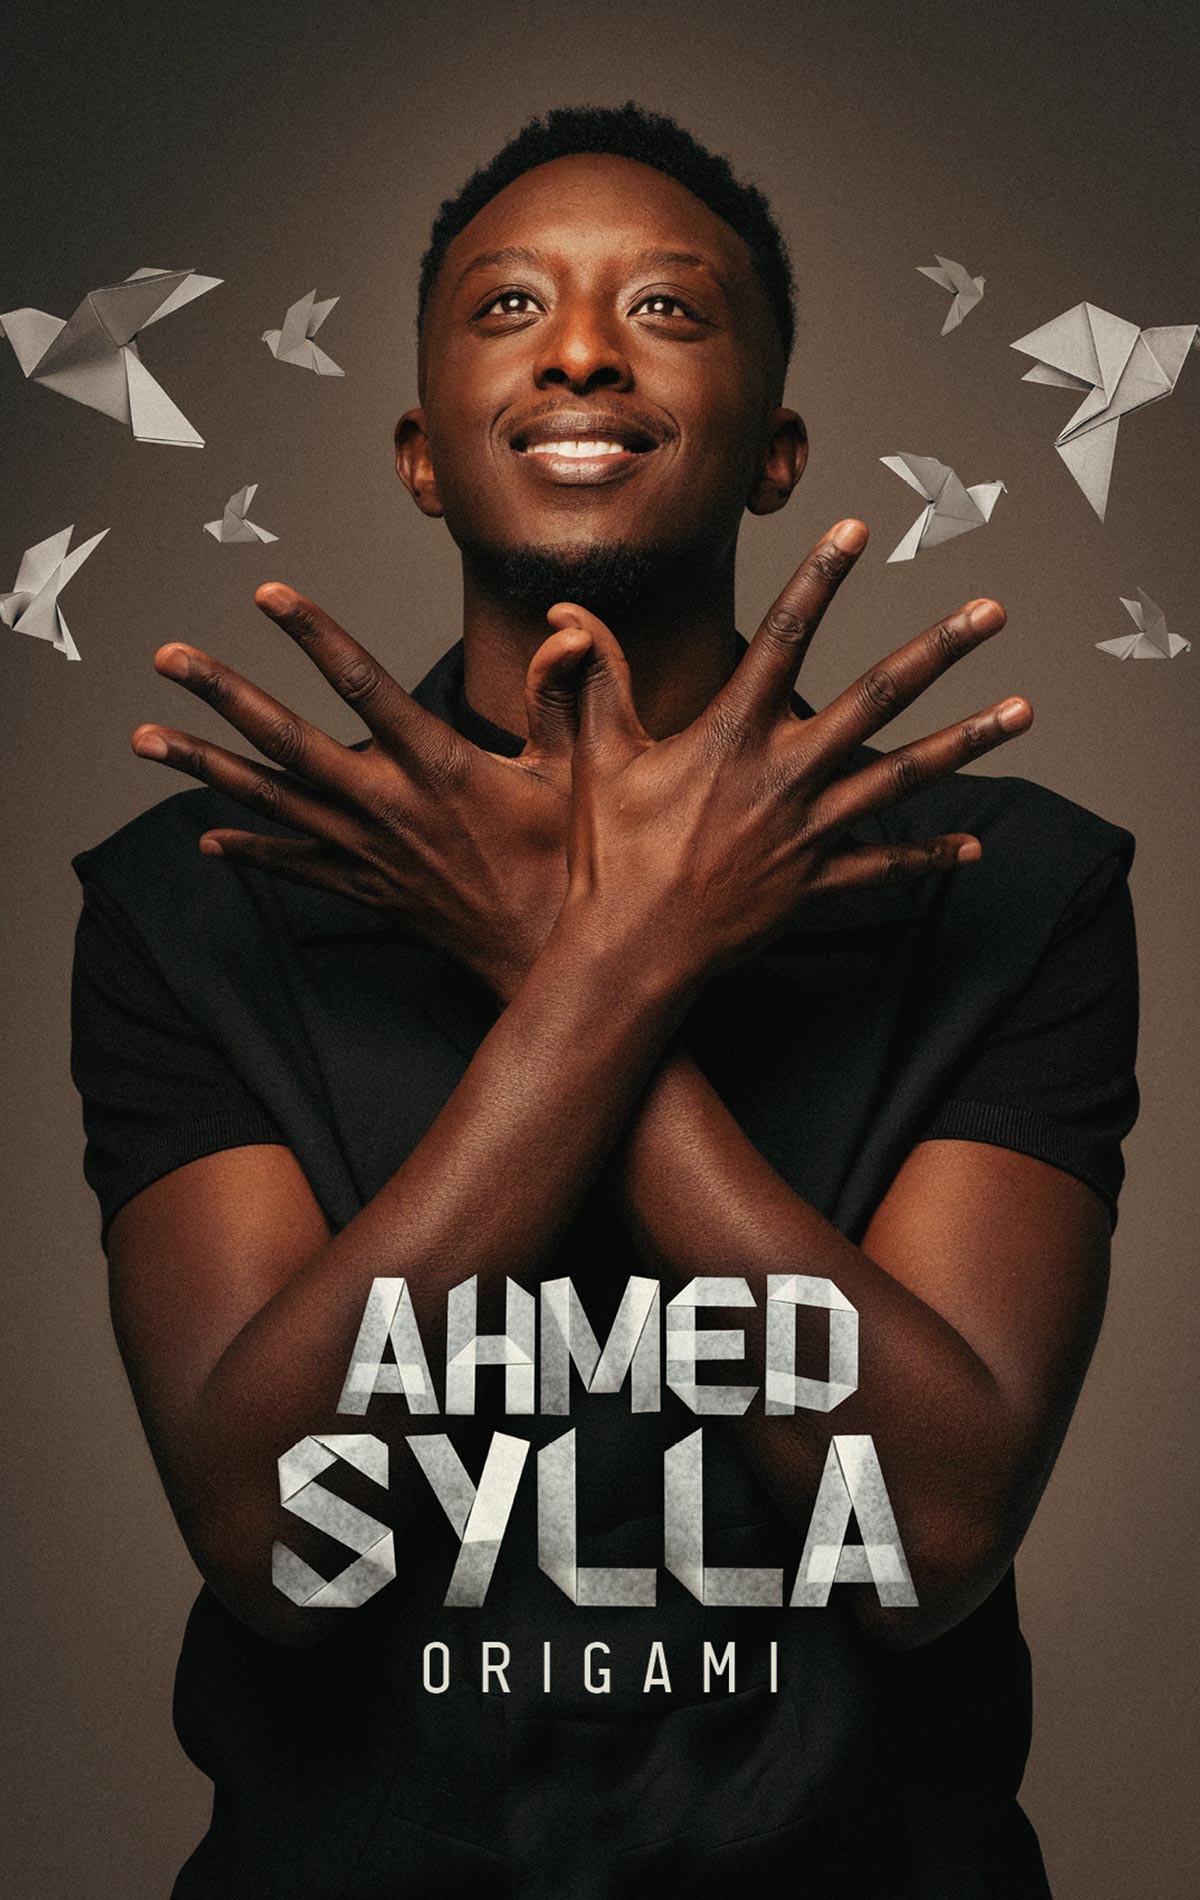 Ahmed Sylla at Espace Aumaillerie Tickets